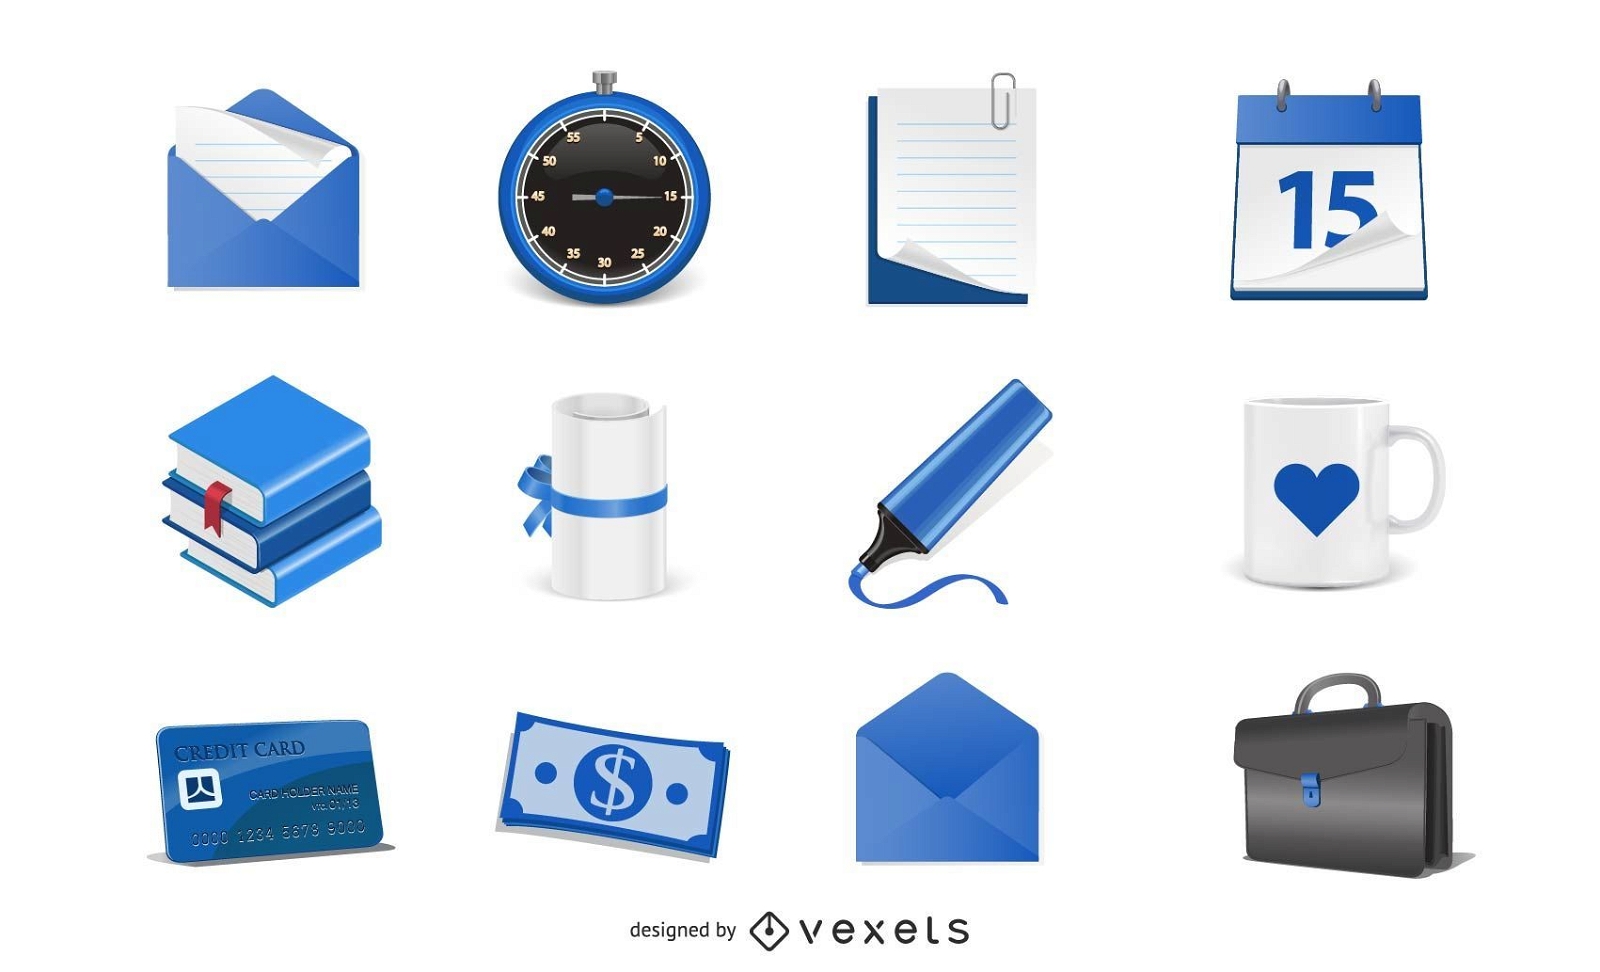 Free Vector Blue Icons